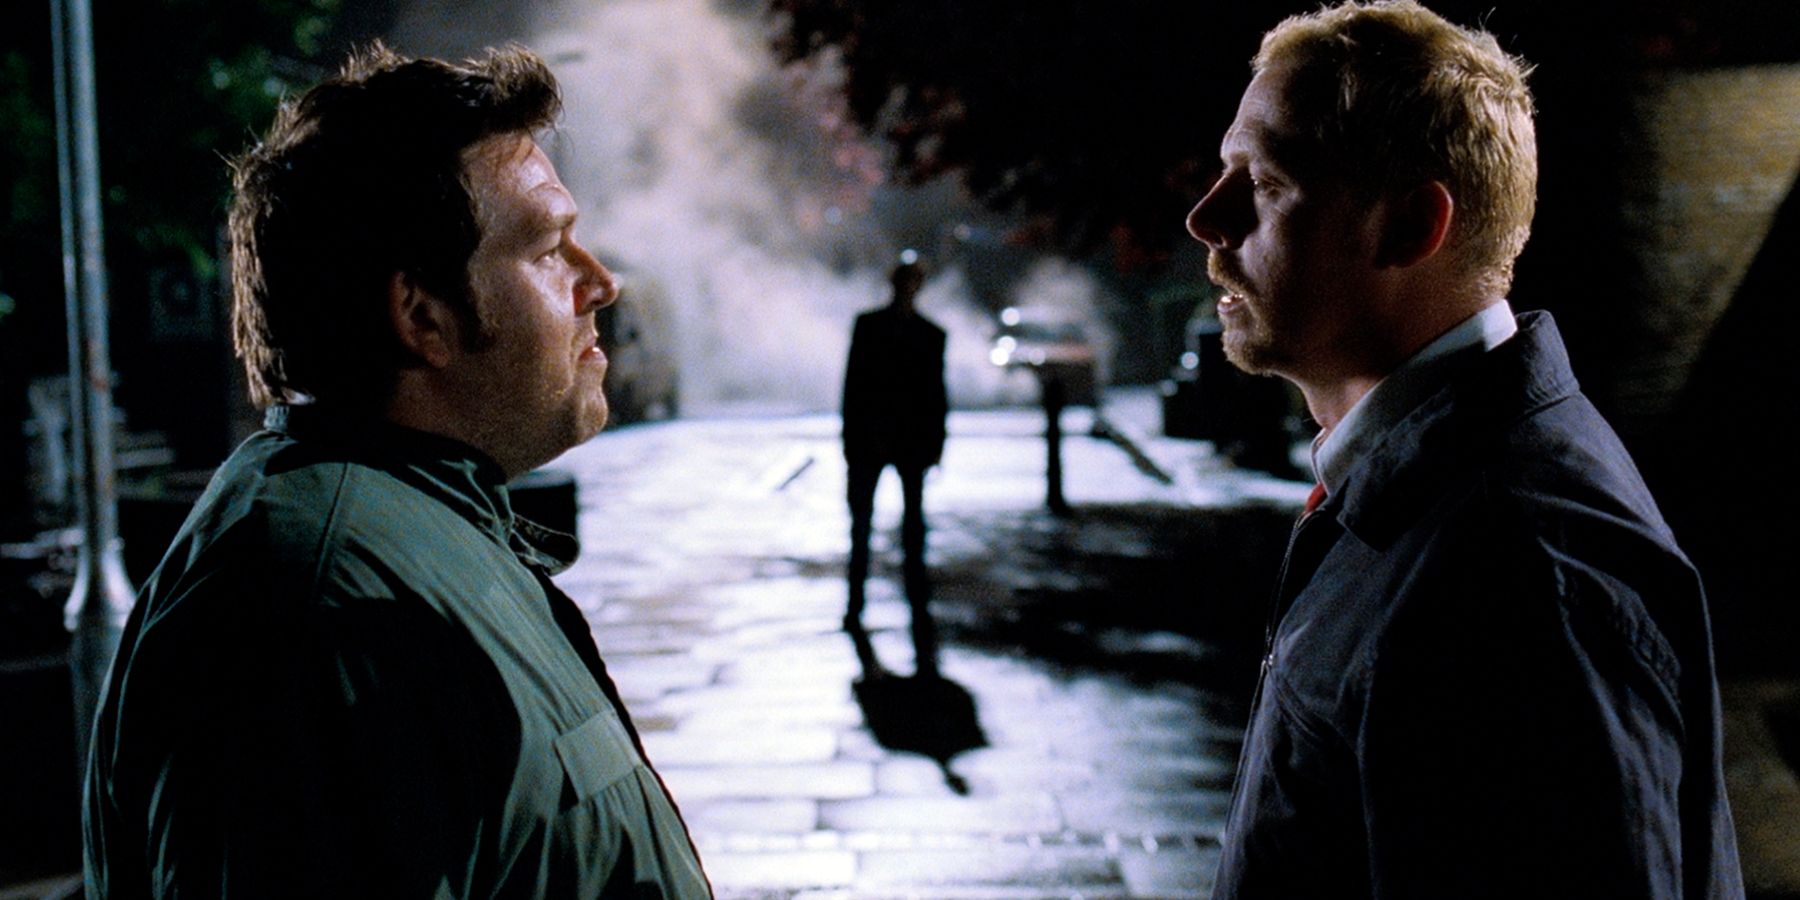 Shaun &amp; Ed talk to each other with a zombie in the background in Shaun of the Dead.